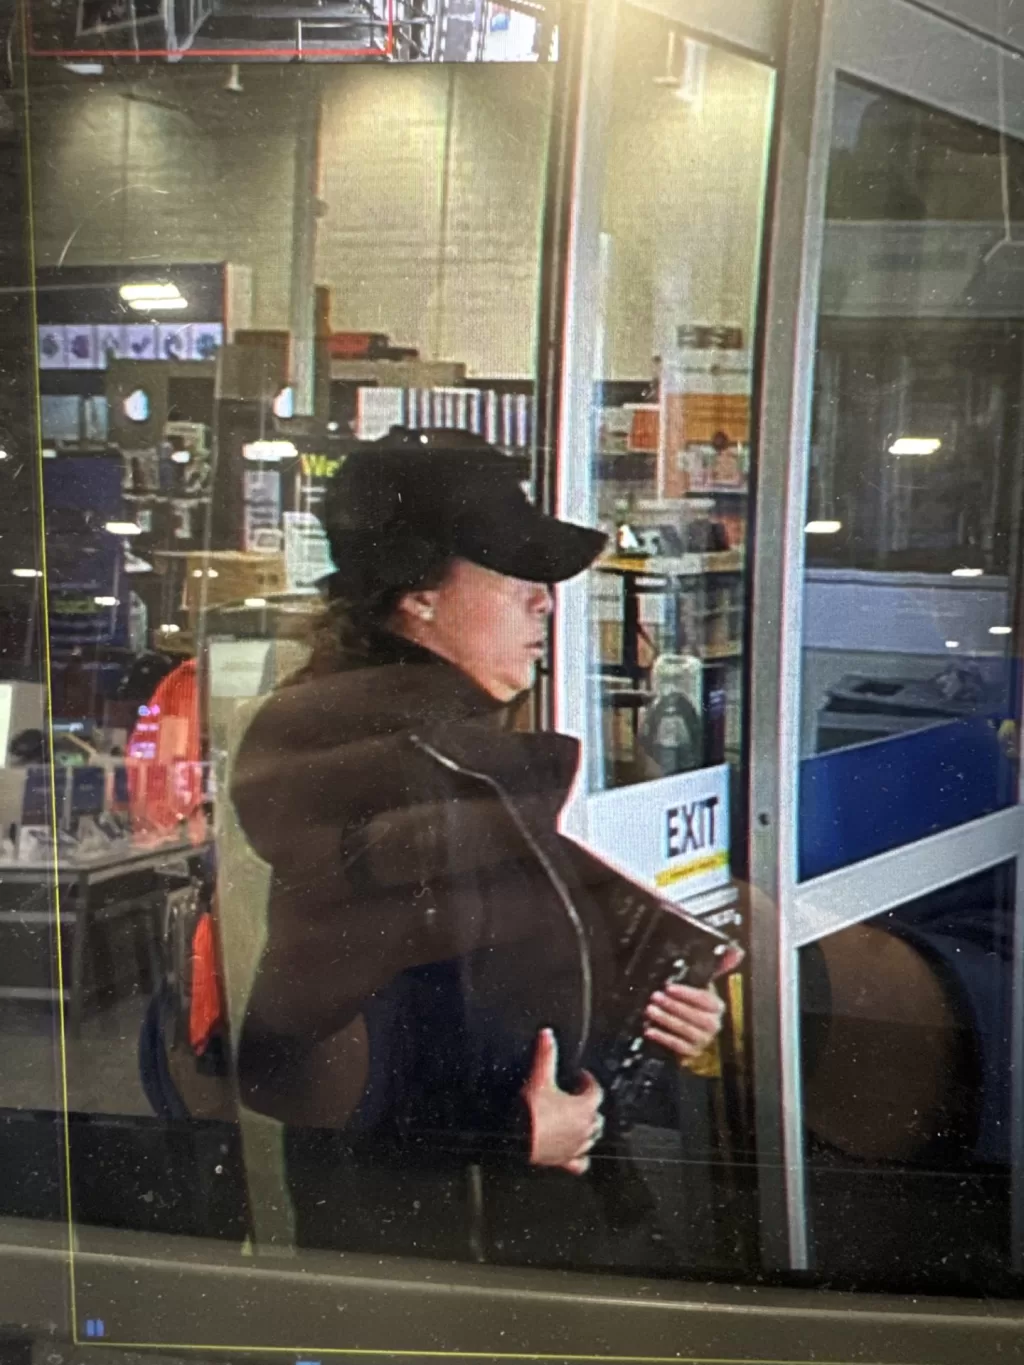 (Photo Courtesy of SCPD) This person used a stolen credit card to buy merchandise at a Best Buy store in Setauket.